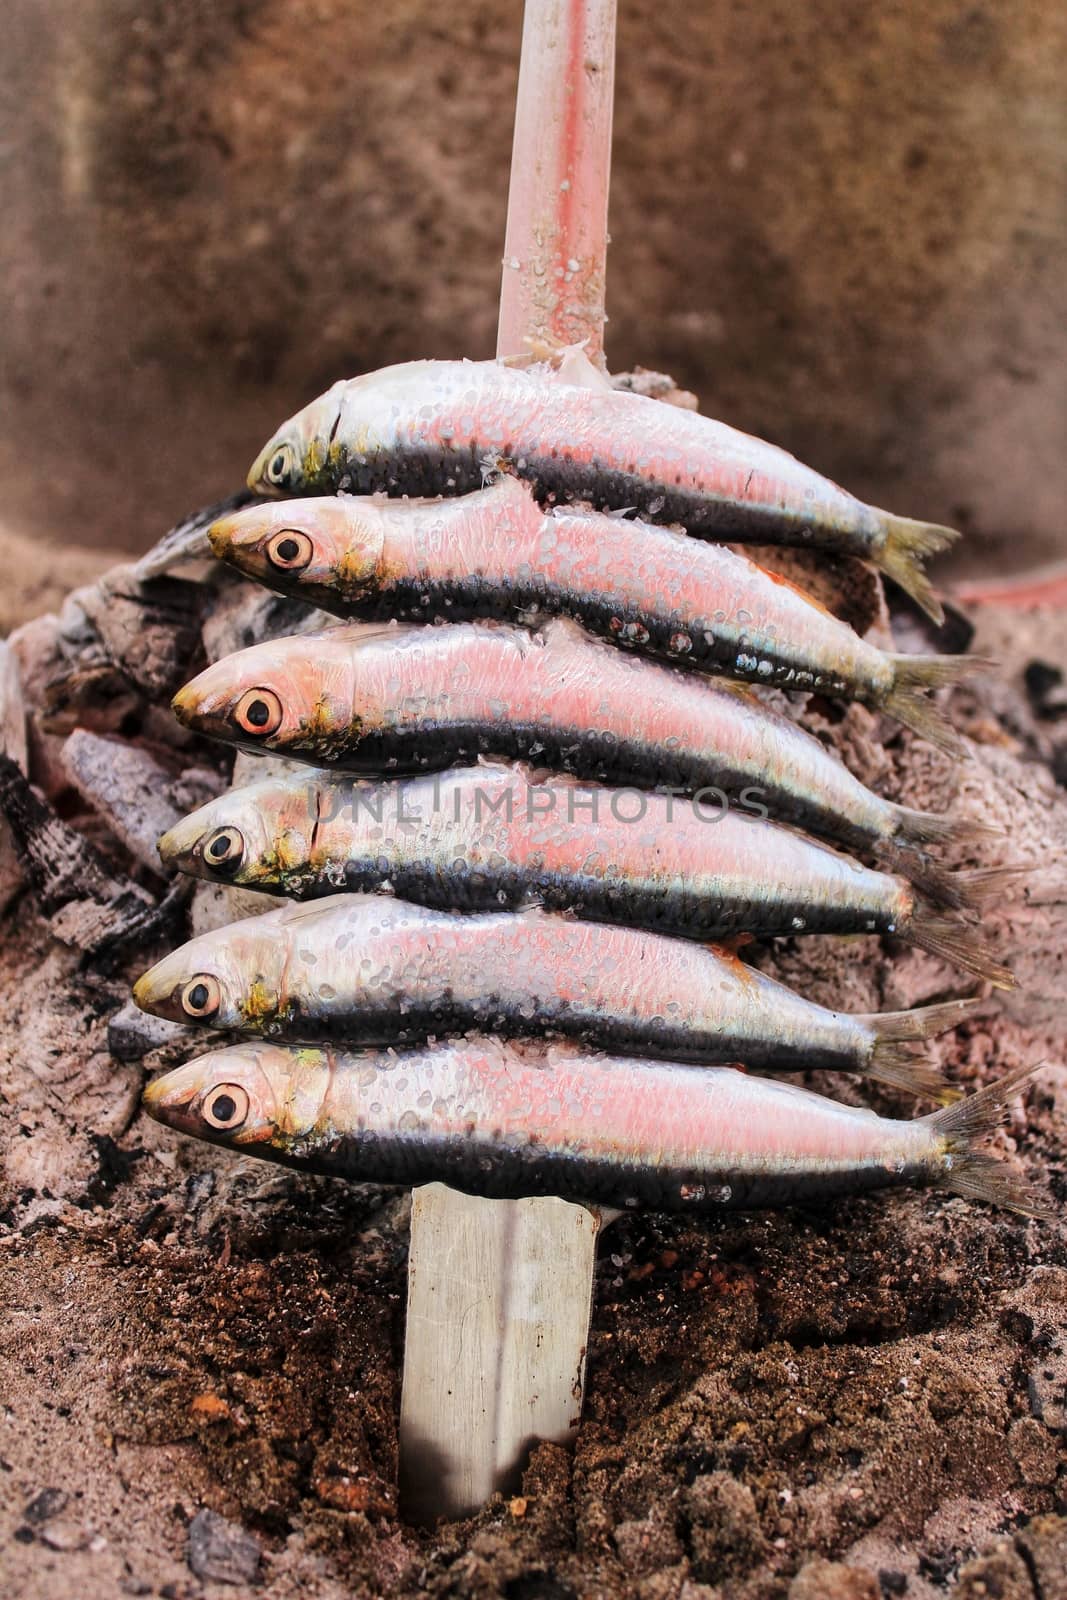 Roasted sardines on a spit in southern Spain in summer